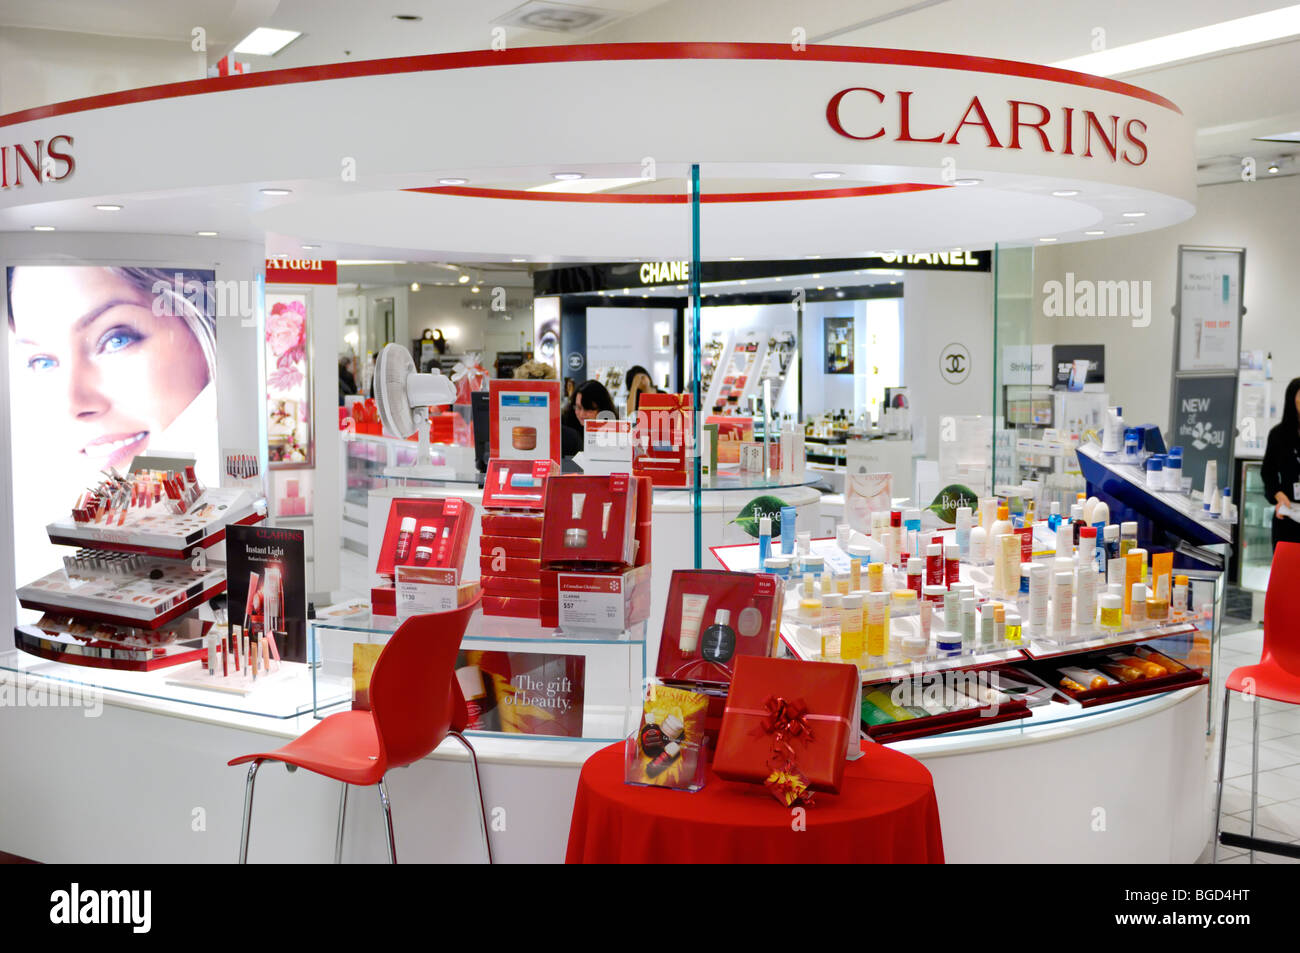 død Brokke sig Ungkarl Clarins cosmetics and makeup display in a shopping mall in Toronto, Canada  Stock Photo - Alamy